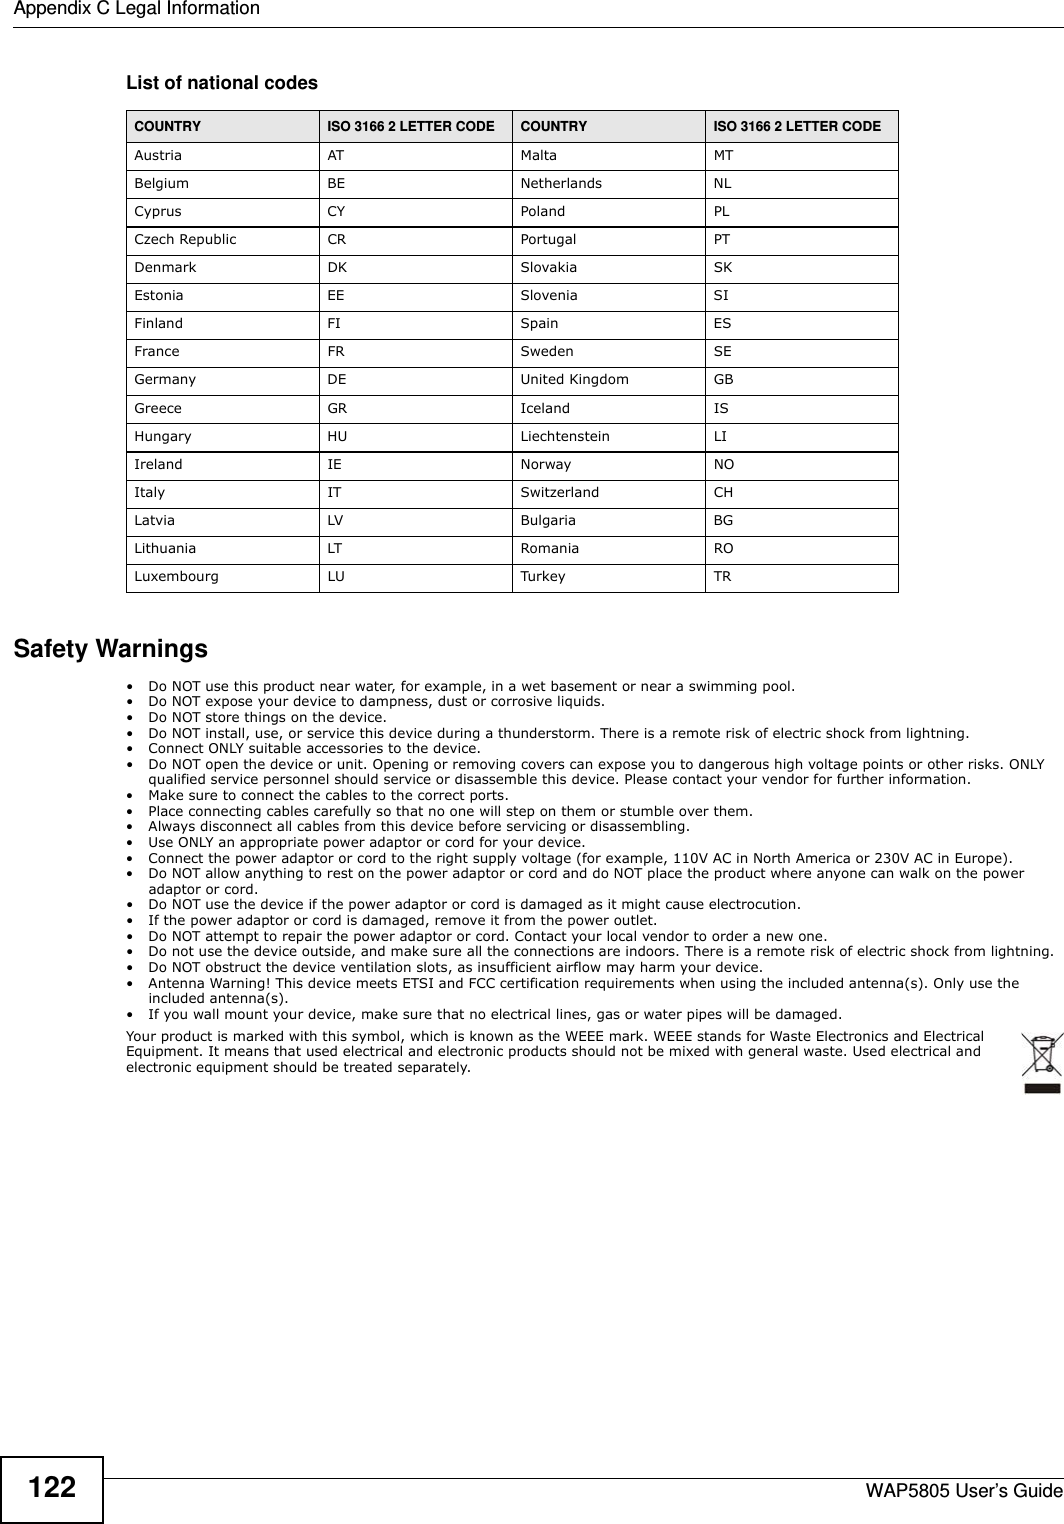 Appendix C Legal InformationWAP5805 User’s Guide122List of national codesSafety Warnings• Do NOT use this product near water, for example, in a wet basement or near a swimming pool.• Do NOT expose your device to dampness, dust or corrosive liquids.• Do NOT store things on the device.• Do NOT install, use, or service this device during a thunderstorm. There is a remote risk of electric shock from lightning.• Connect ONLY suitable accessories to the device.• Do NOT open the device or unit. Opening or removing covers can expose you to dangerous high voltage points or other risks. ONLY qualified service personnel should service or disassemble this device. Please contact your vendor for further information.• Make sure to connect the cables to the correct ports.• Place connecting cables carefully so that no one will step on them or stumble over them.• Always disconnect all cables from this device before servicing or disassembling.• Use ONLY an appropriate power adaptor or cord for your device.• Connect the power adaptor or cord to the right supply voltage (for example, 110V AC in North America or 230V AC in Europe).• Do NOT allow anything to rest on the power adaptor or cord and do NOT place the product where anyone can walk on the power adaptor or cord.• Do NOT use the device if the power adaptor or cord is damaged as it might cause electrocution.• If the power adaptor or cord is damaged, remove it from the power outlet.• Do NOT attempt to repair the power adaptor or cord. Contact your local vendor to order a new one.• Do not use the device outside, and make sure all the connections are indoors. There is a remote risk of electric shock from lightning. • Do NOT obstruct the device ventilation slots, as insufficient airflow may harm your device. • Antenna Warning! This device meets ETSI and FCC certification requirements when using the included antenna(s). Only use the included antenna(s). • If you wall mount your device, make sure that no electrical lines, gas or water pipes will be damaged.Your product is marked with this symbol, which is known as the WEEE mark. WEEE stands for Waste Electronics and Electrical Equipment. It means that used electrical and electronic products should not be mixed with general waste. Used electrical and electronic equipment should be treated separately. COUNTRY ISO 3166 2 LETTER CODE COUNTRY ISO 3166 2 LETTER CODEAustria AT Malta MTBelgium BE Netherlands NLCyprus CY Poland PLCzech Republic CR Portugal PTDenmark DK Slovakia SKEstonia EE Slovenia SIFinland FI Spain ESFrance FR Sweden SEGermany DE United Kingdom GBGreece GR Iceland ISHungary HU Liechtenstein LIIreland IE Norway NOItaly IT Switzerland CHLatvia LV Bulgaria BGLithuania LT Romania ROLuxembourg LU Turkey TR